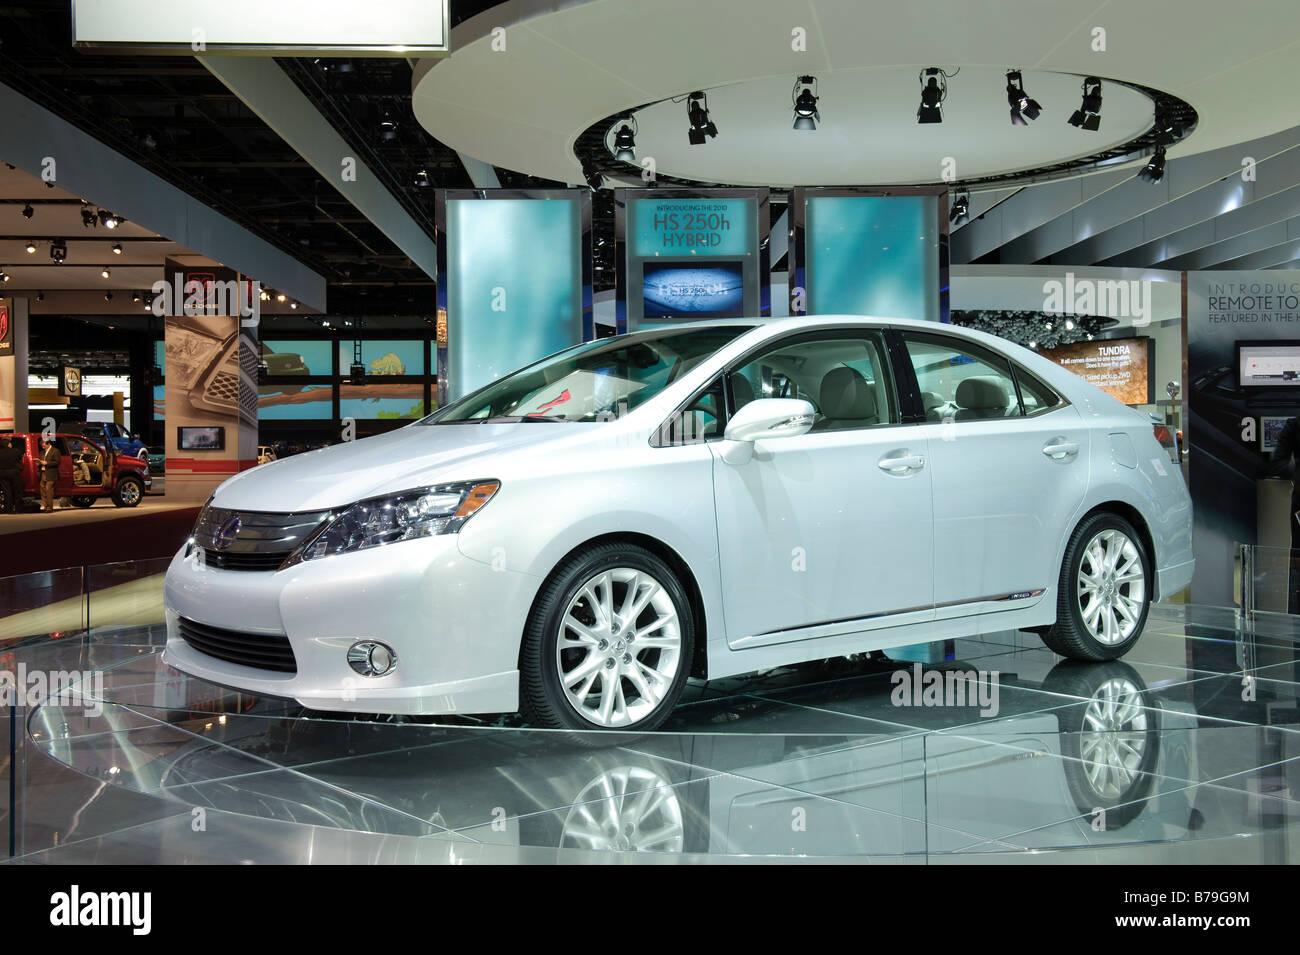 2010 Lexus HS 250h hybrid car at the 2009 North American International Auto Show in Detroit Michigan USA Stock Photo